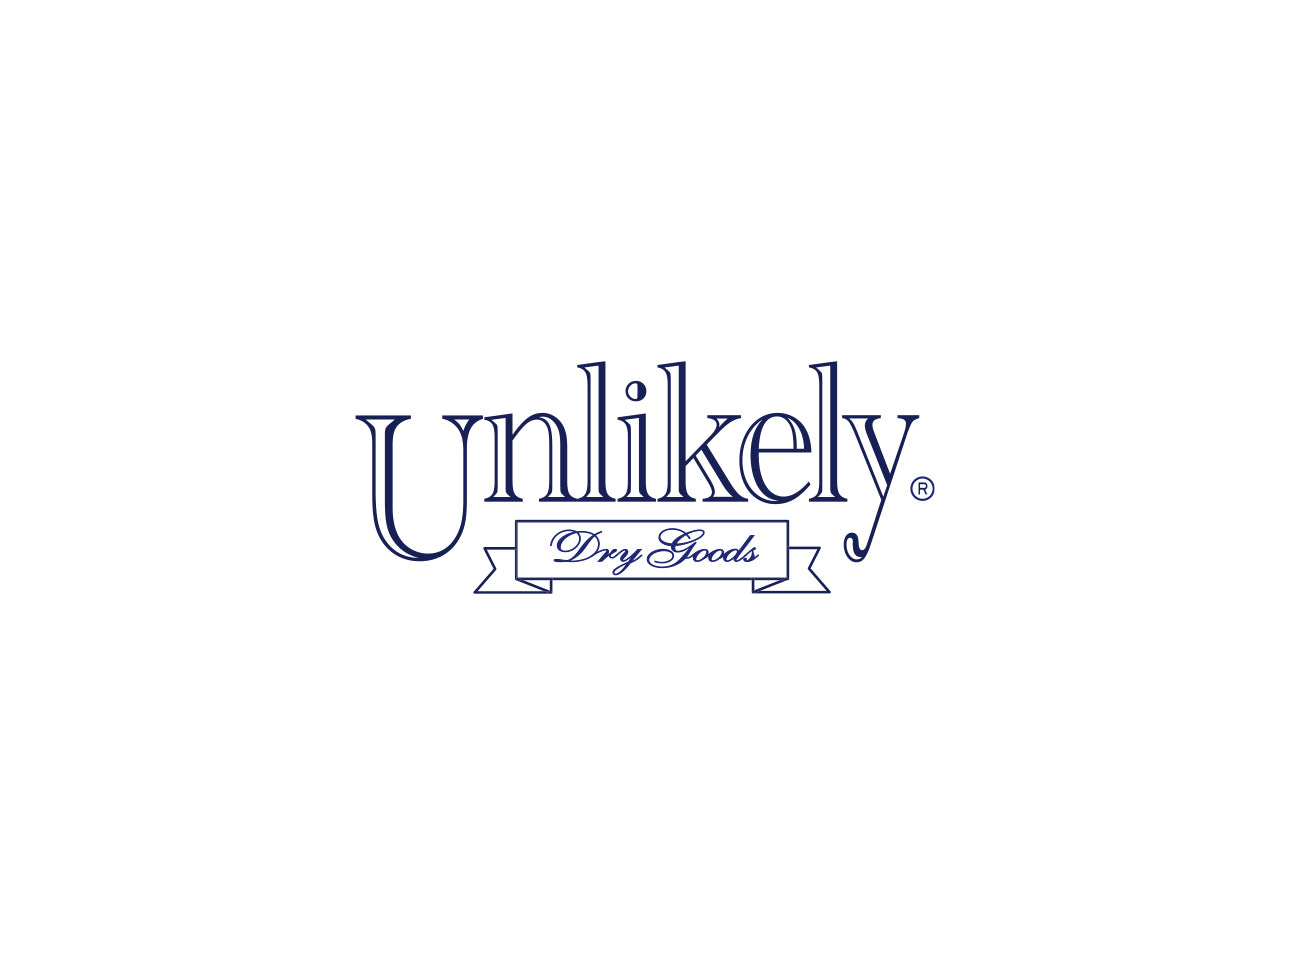 NEW BRAND Unlikely